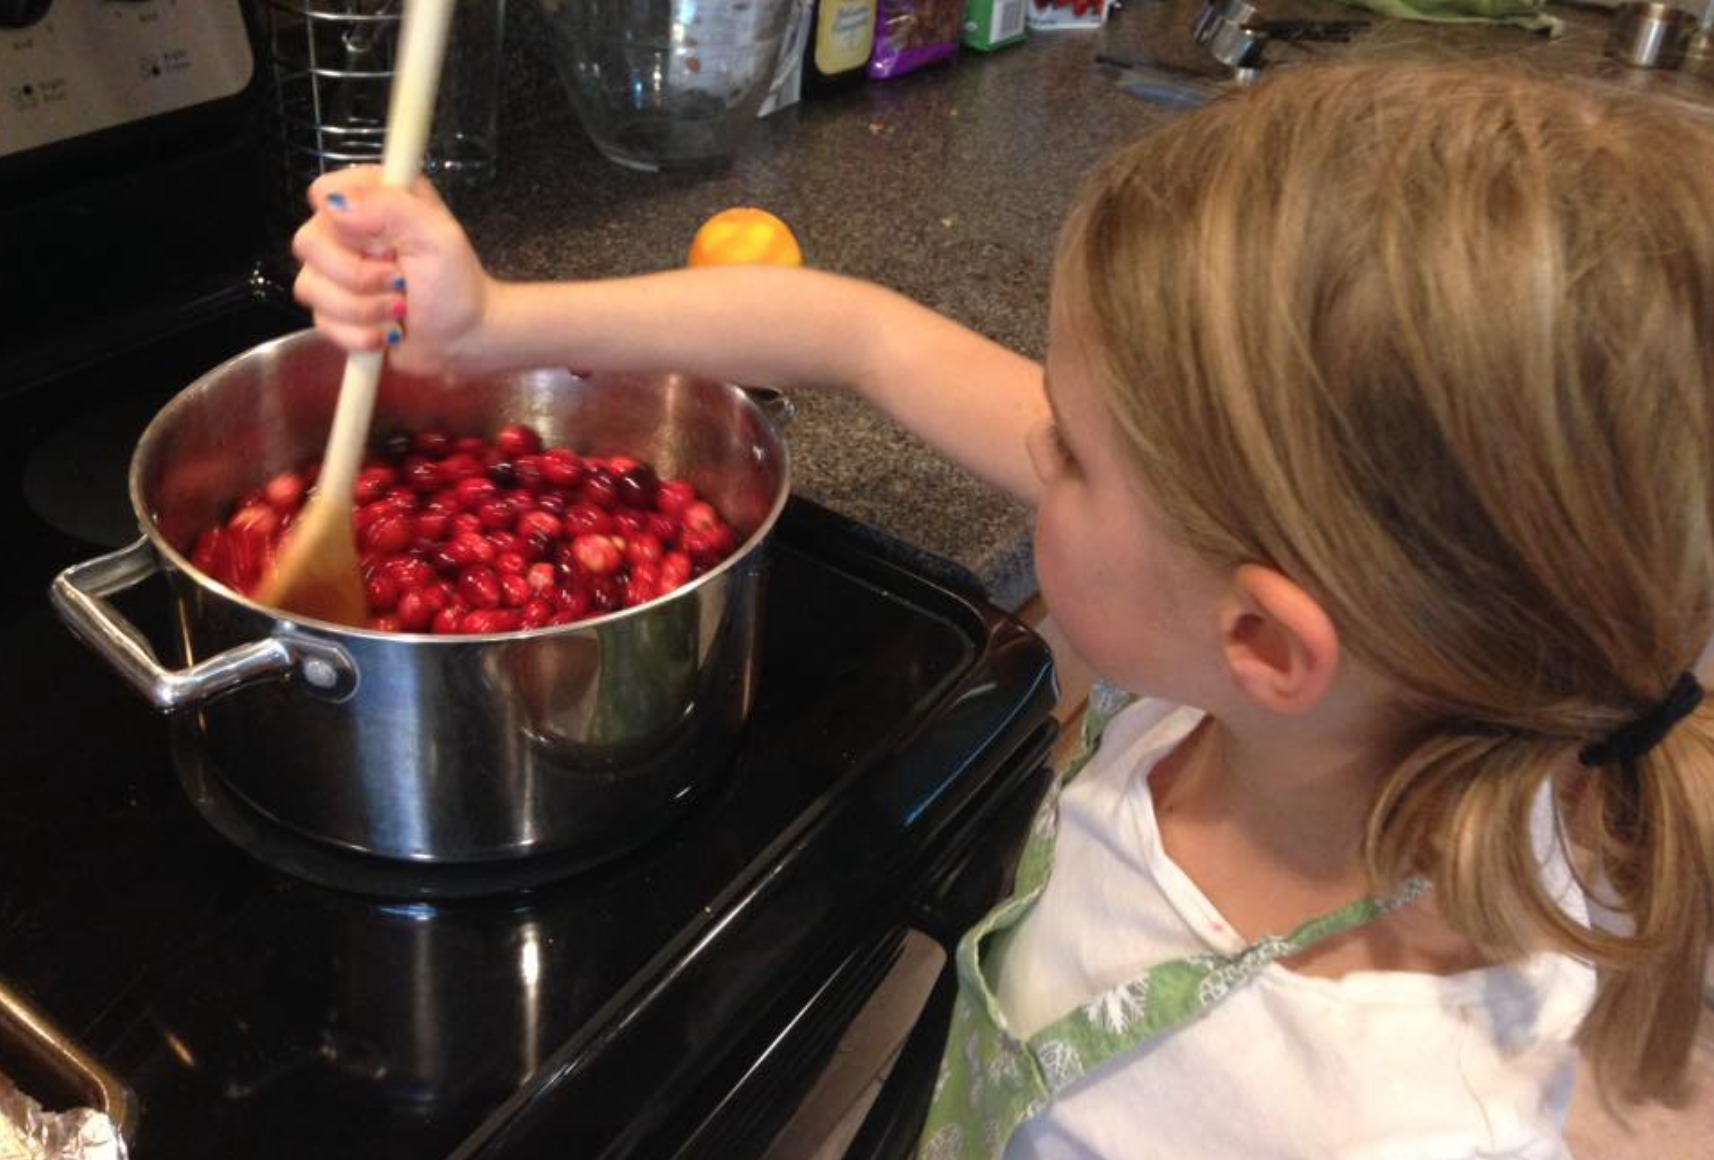 Little girl stirring homemade cranberry orange sauce in a pot on the stove.